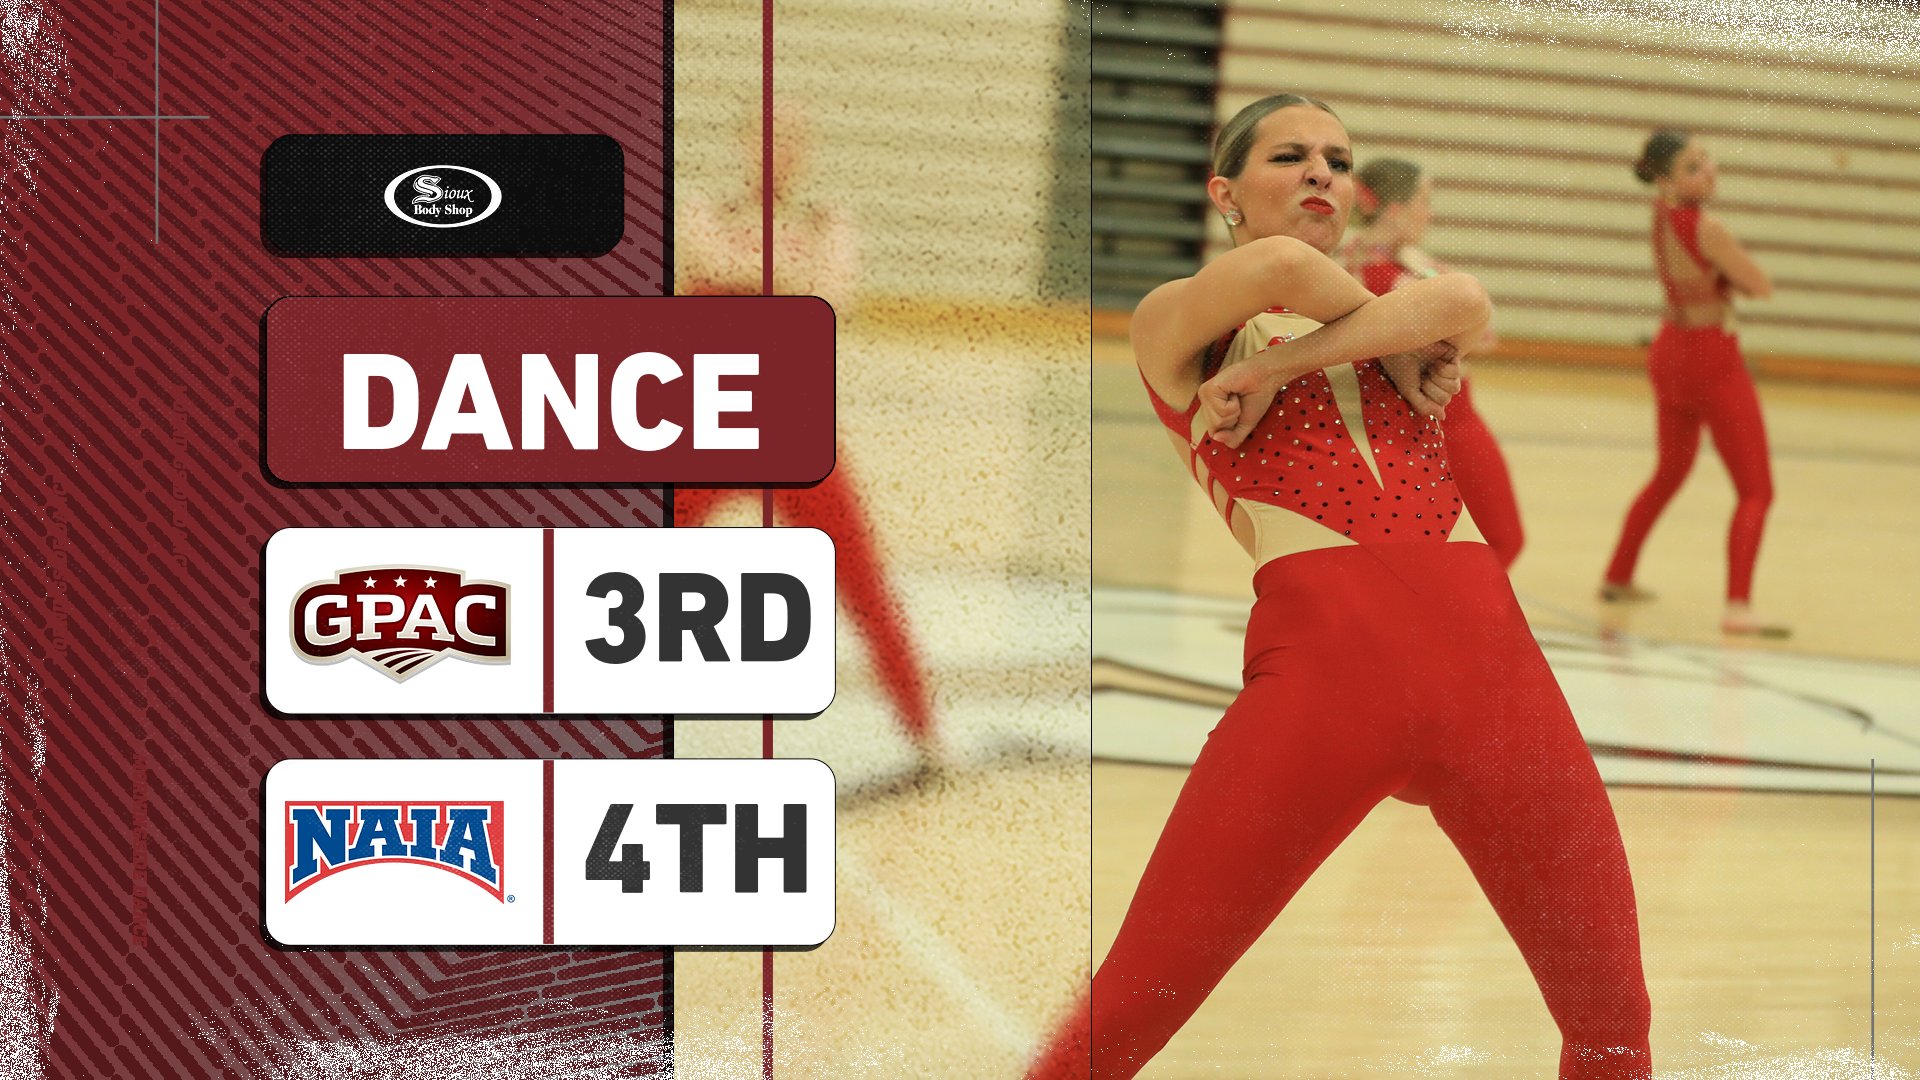 Dance places third in GPAC Championship, fourth in NAIA qualifier